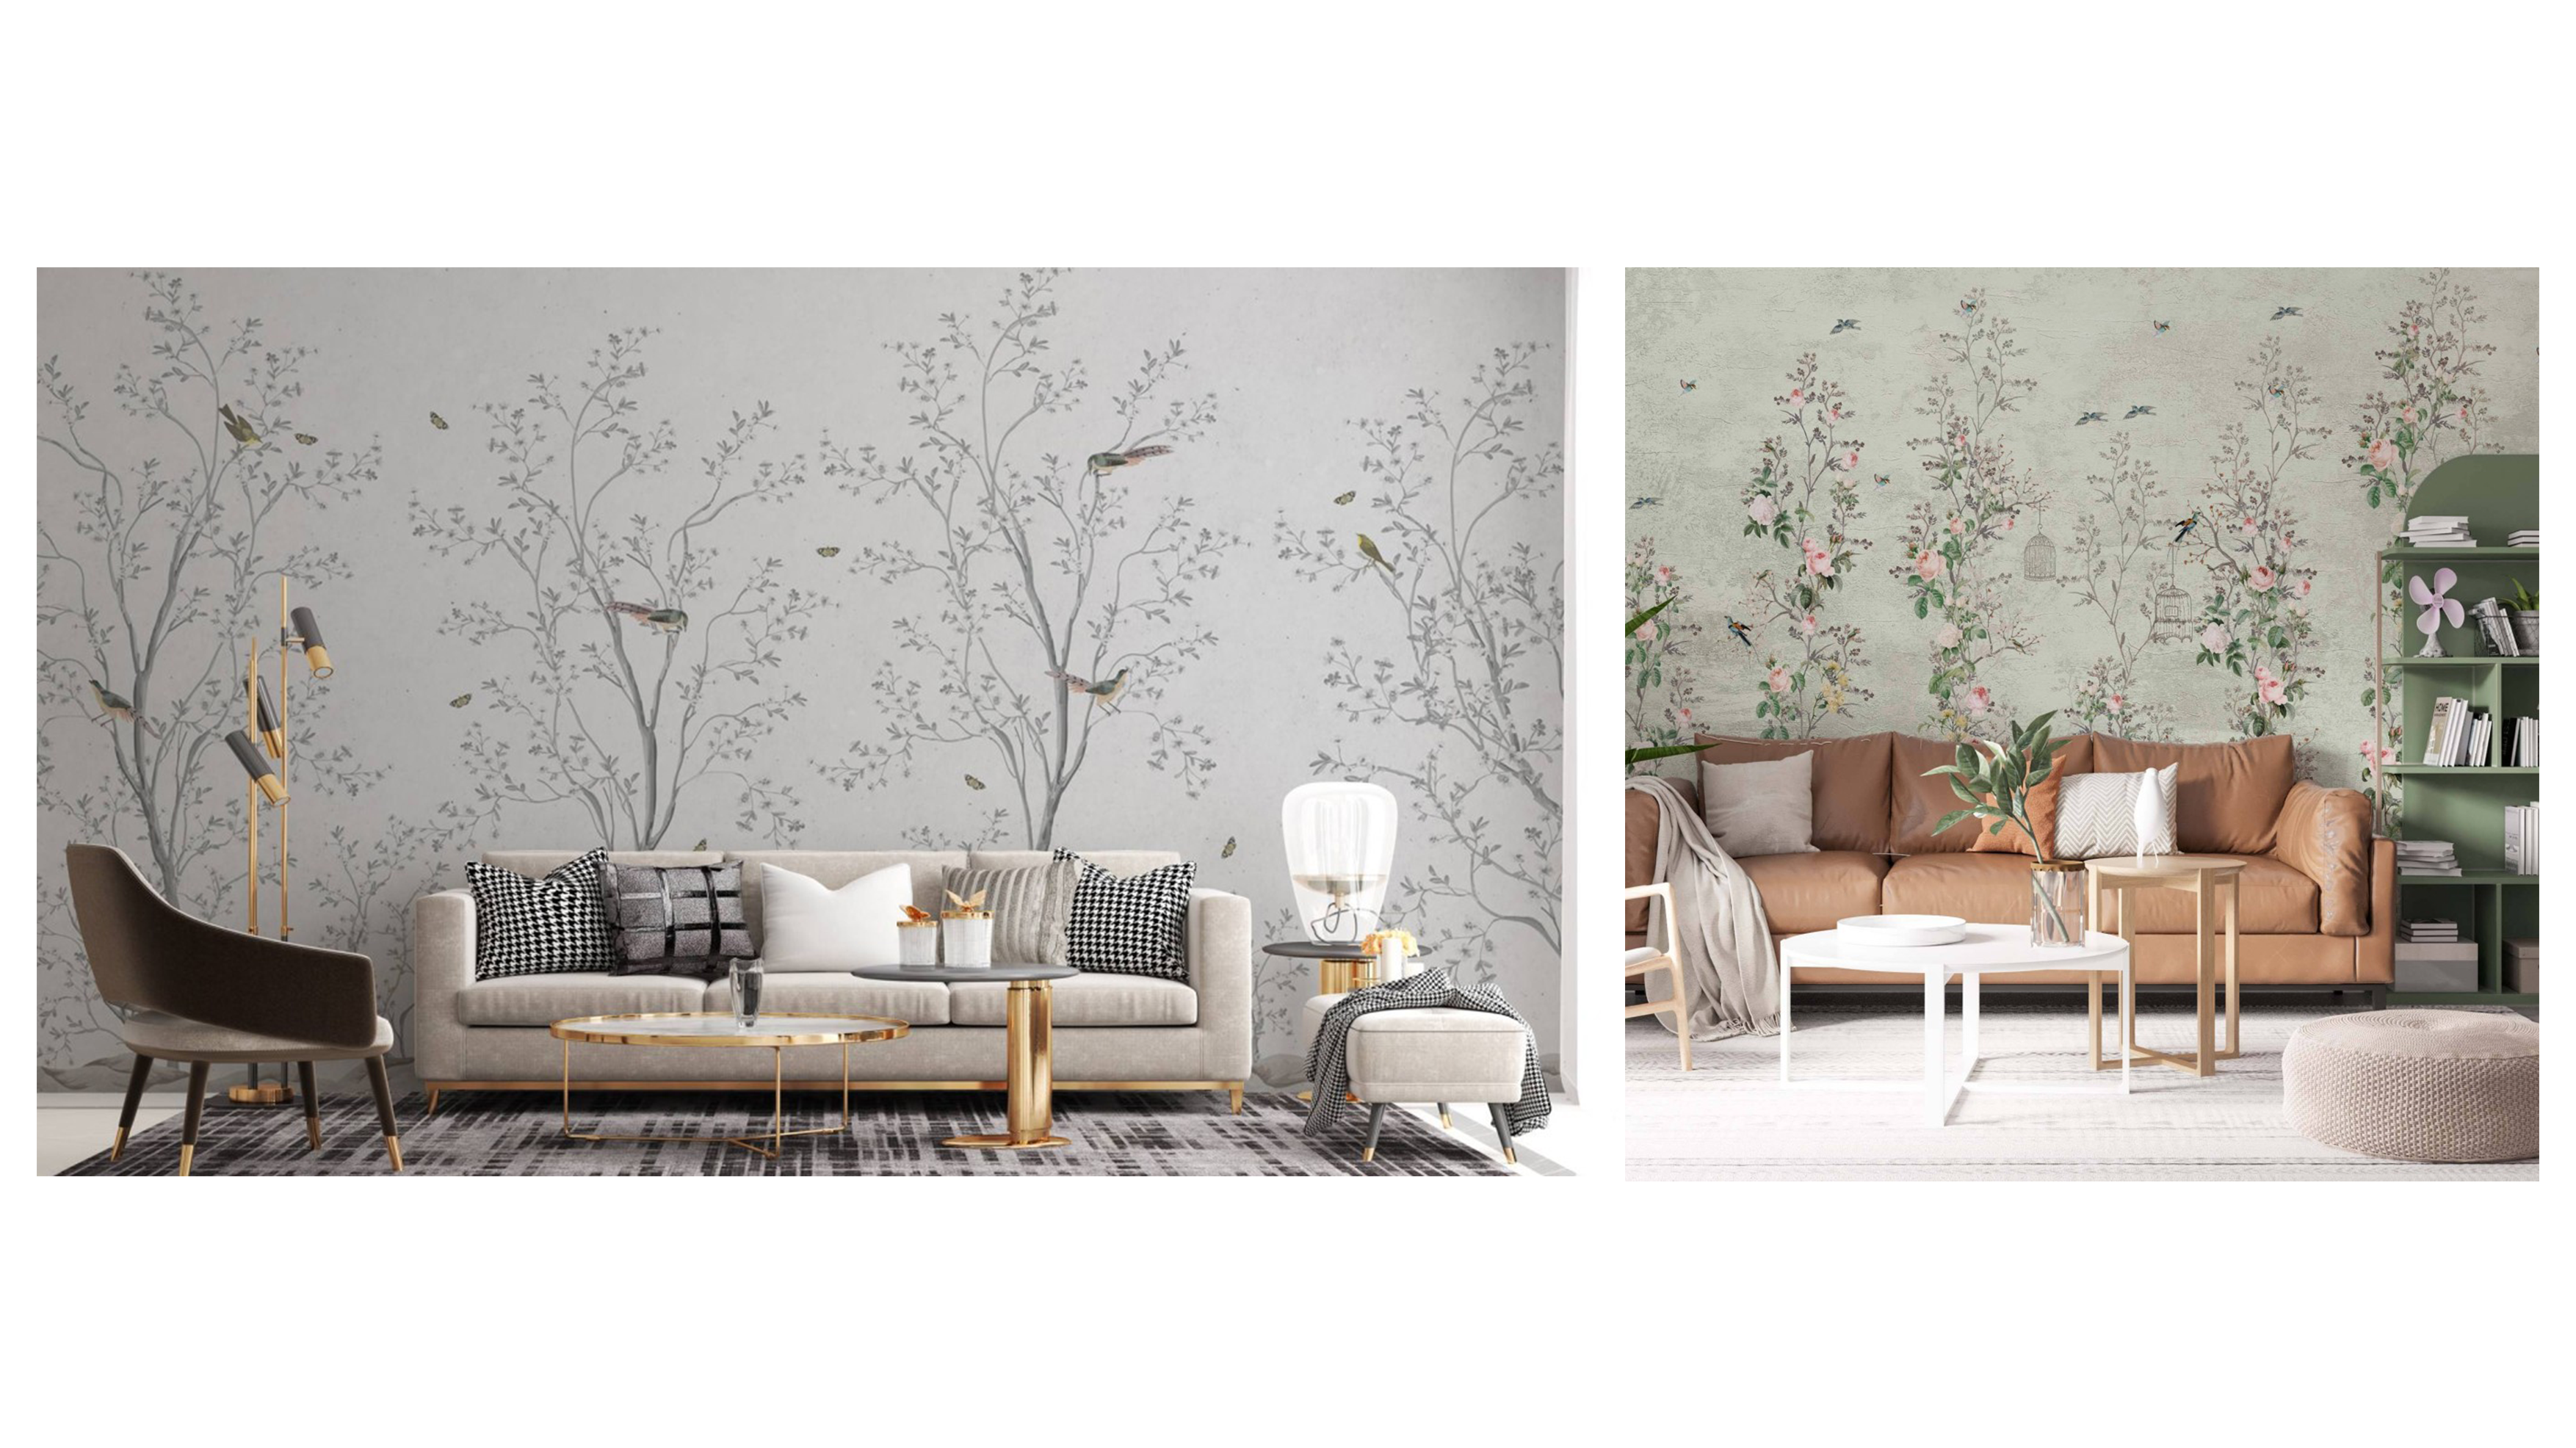 This wallpaper became one of the options that have a luxurious design